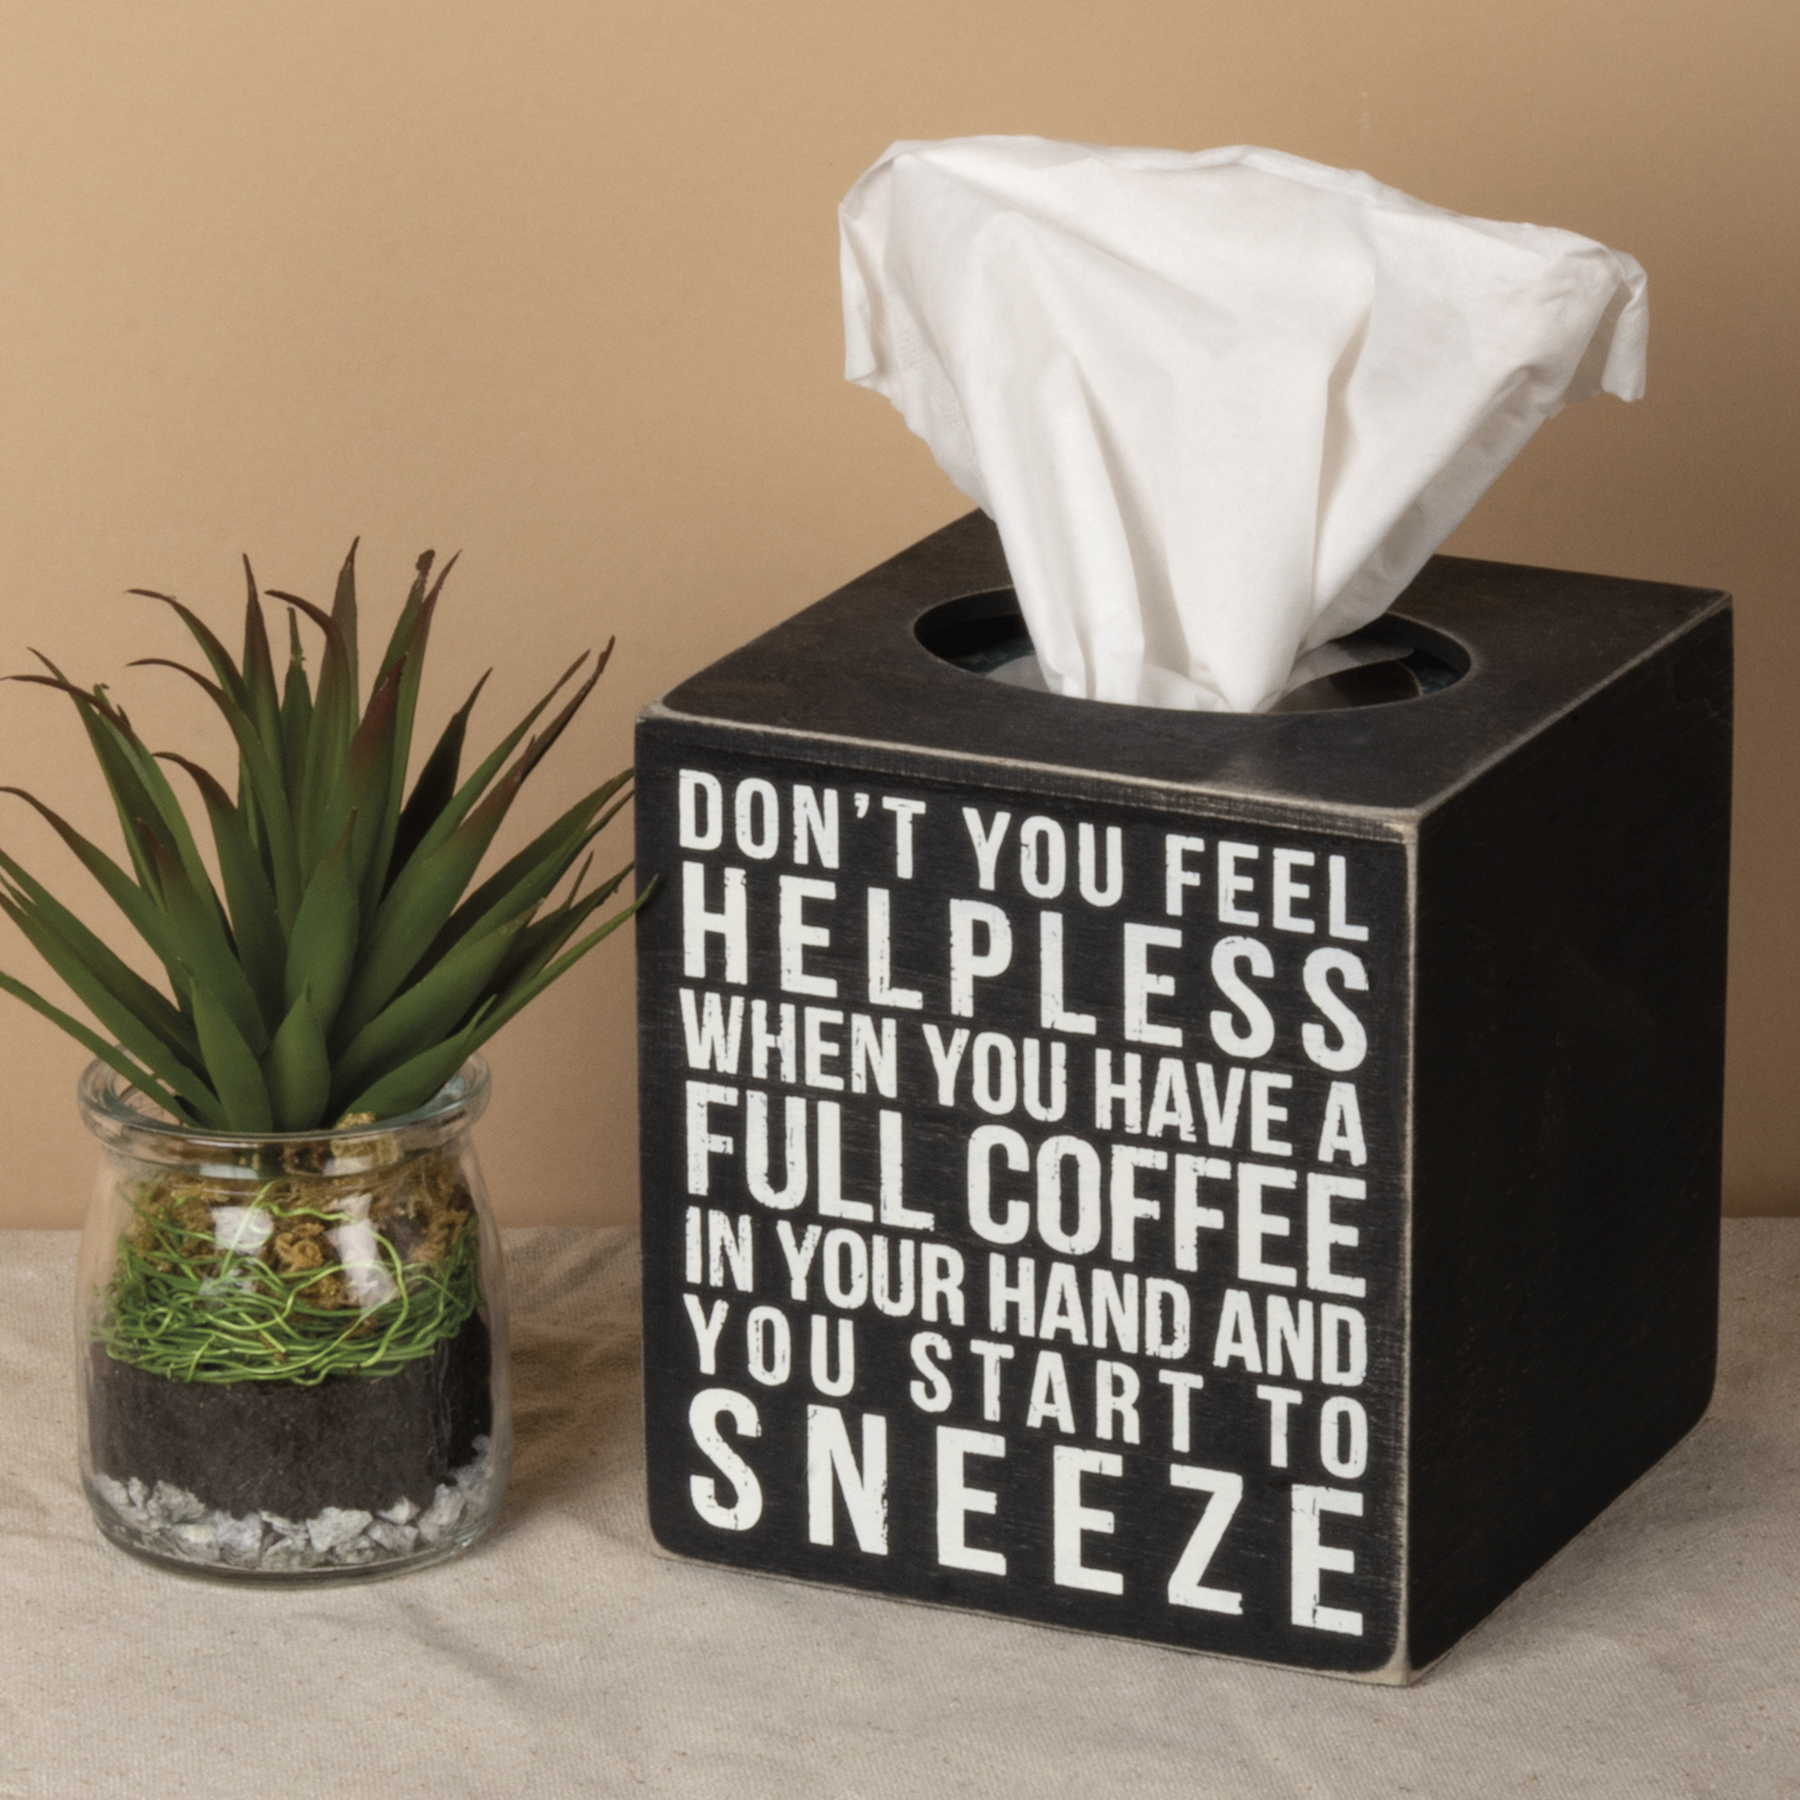 Scripture Wood Sign - God Bless You Tissue Box Cover – The